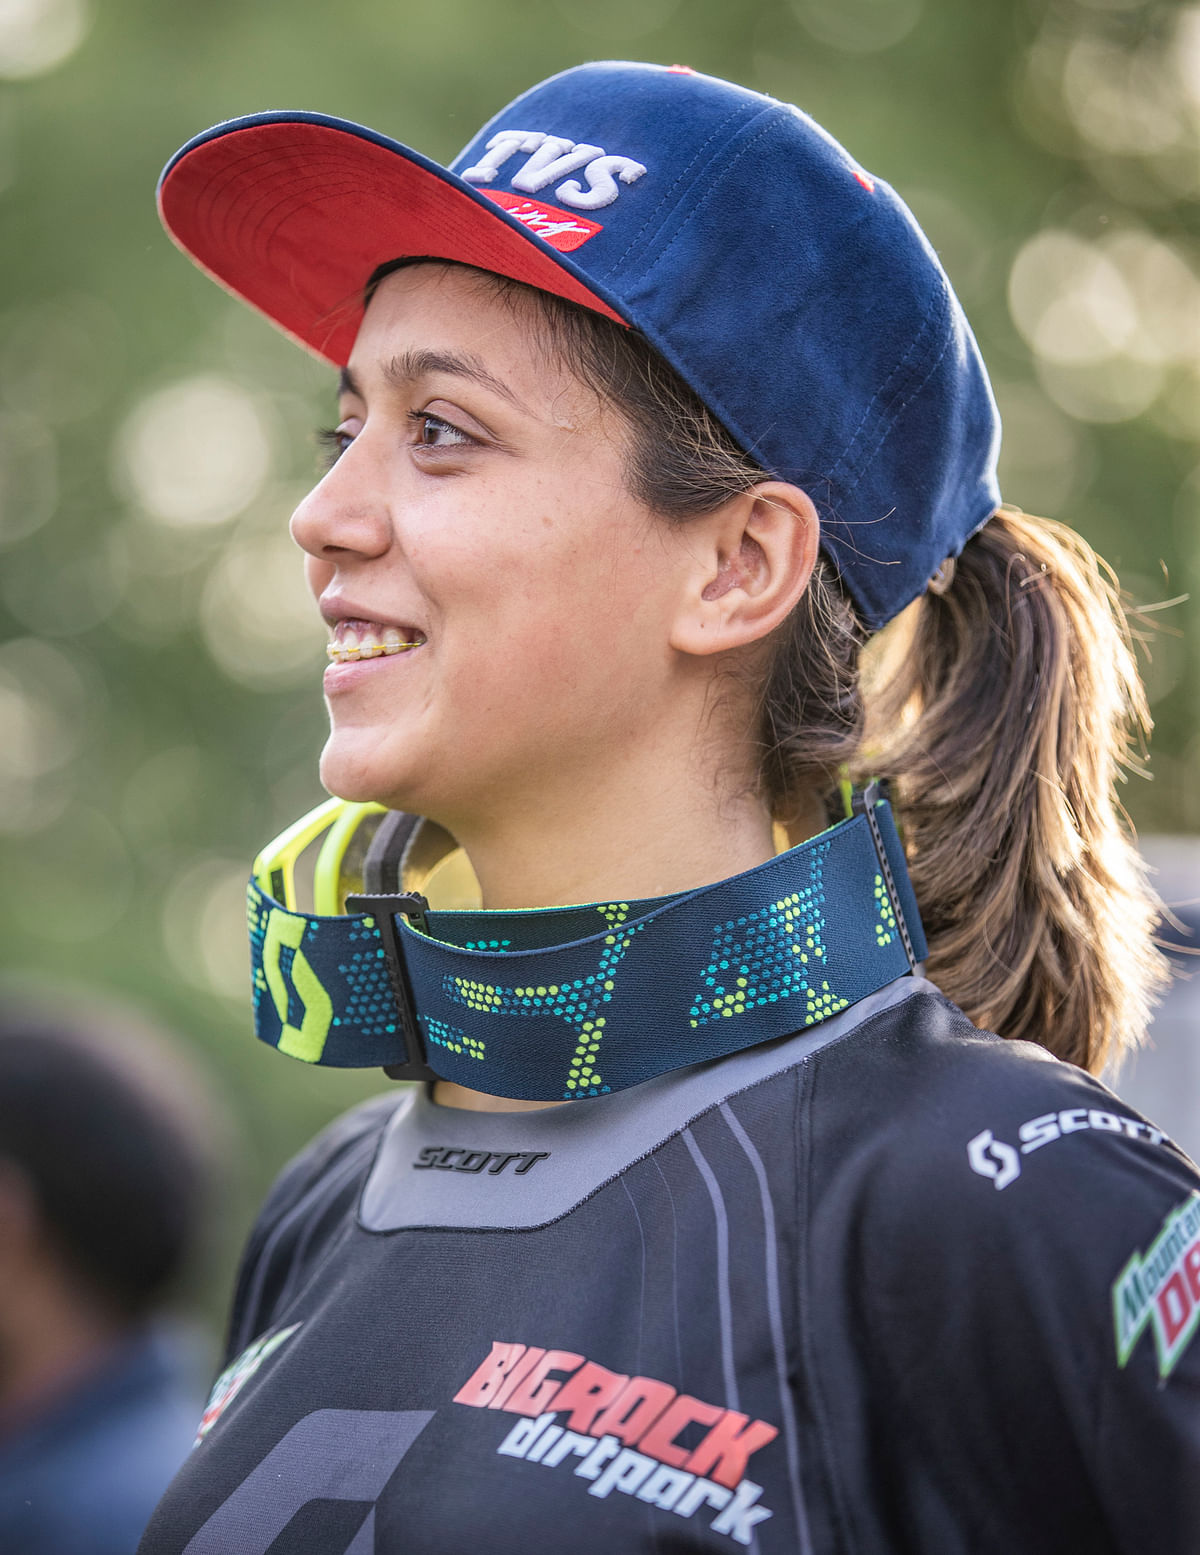 Aishwarya Pissay has created history by annexing the FIM World Cup in the women’s category.